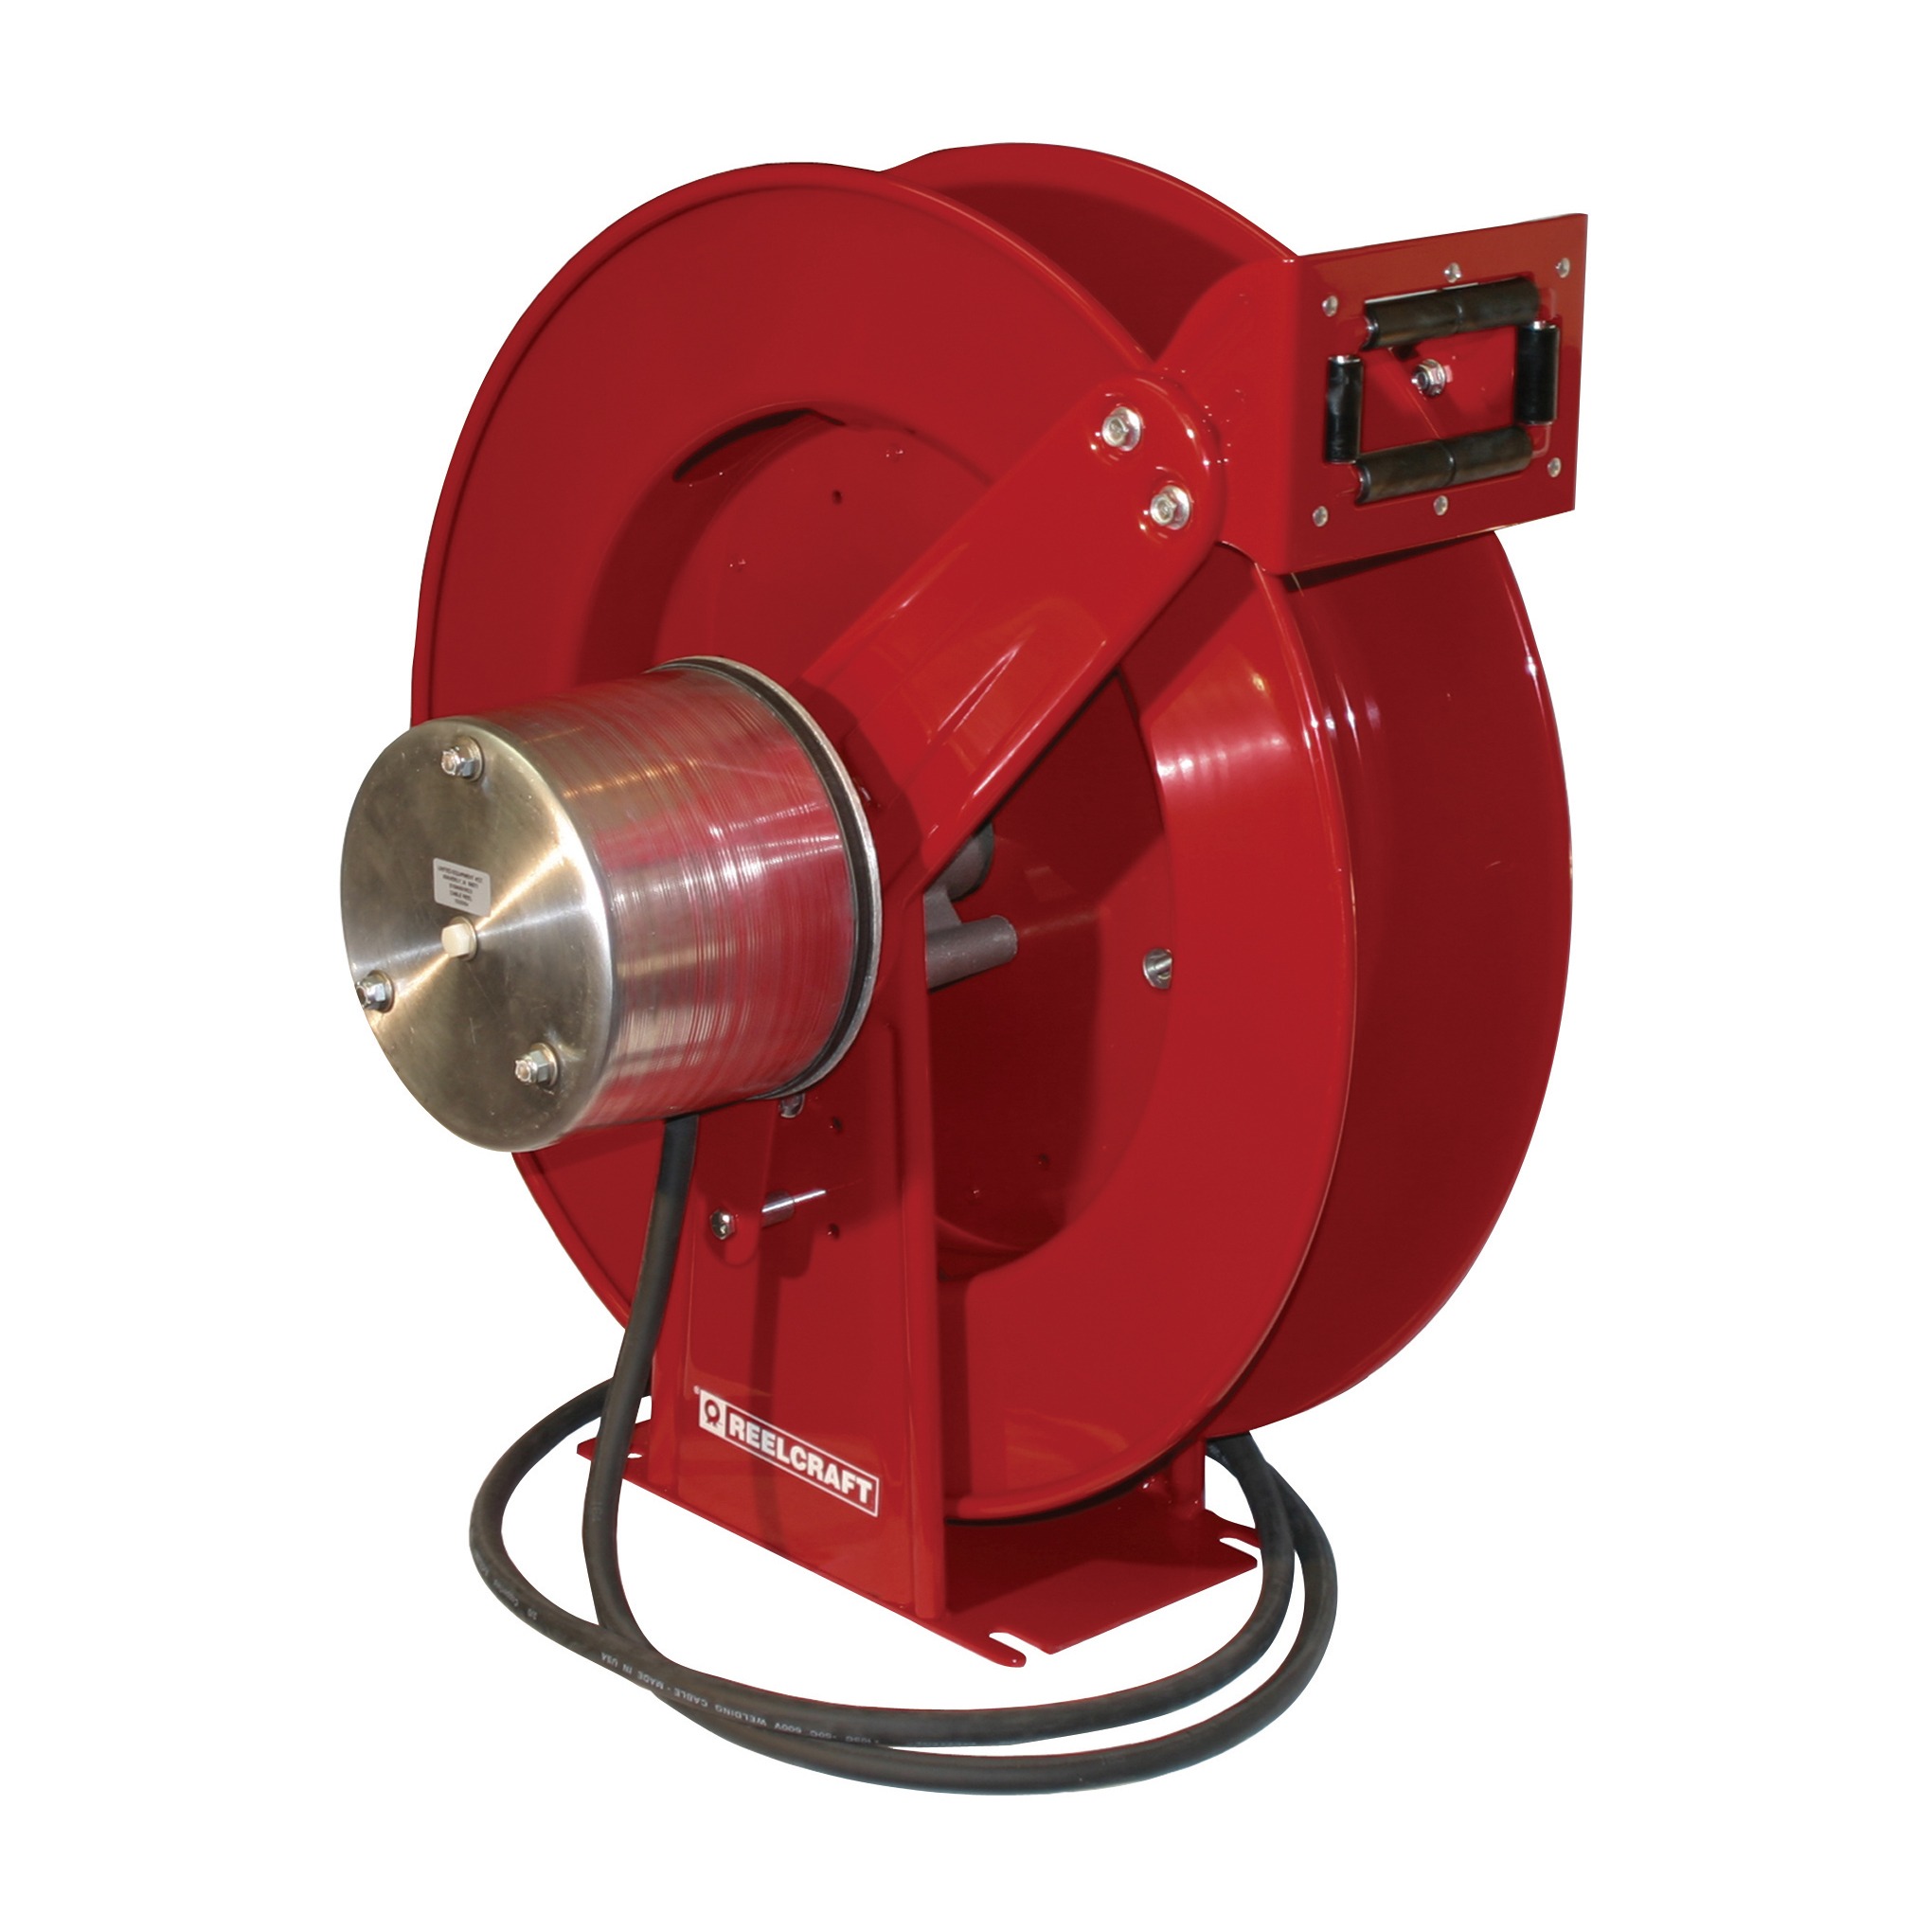 Welding Cable Reels - Hose, Cord and Cable Reels - Reelcraft